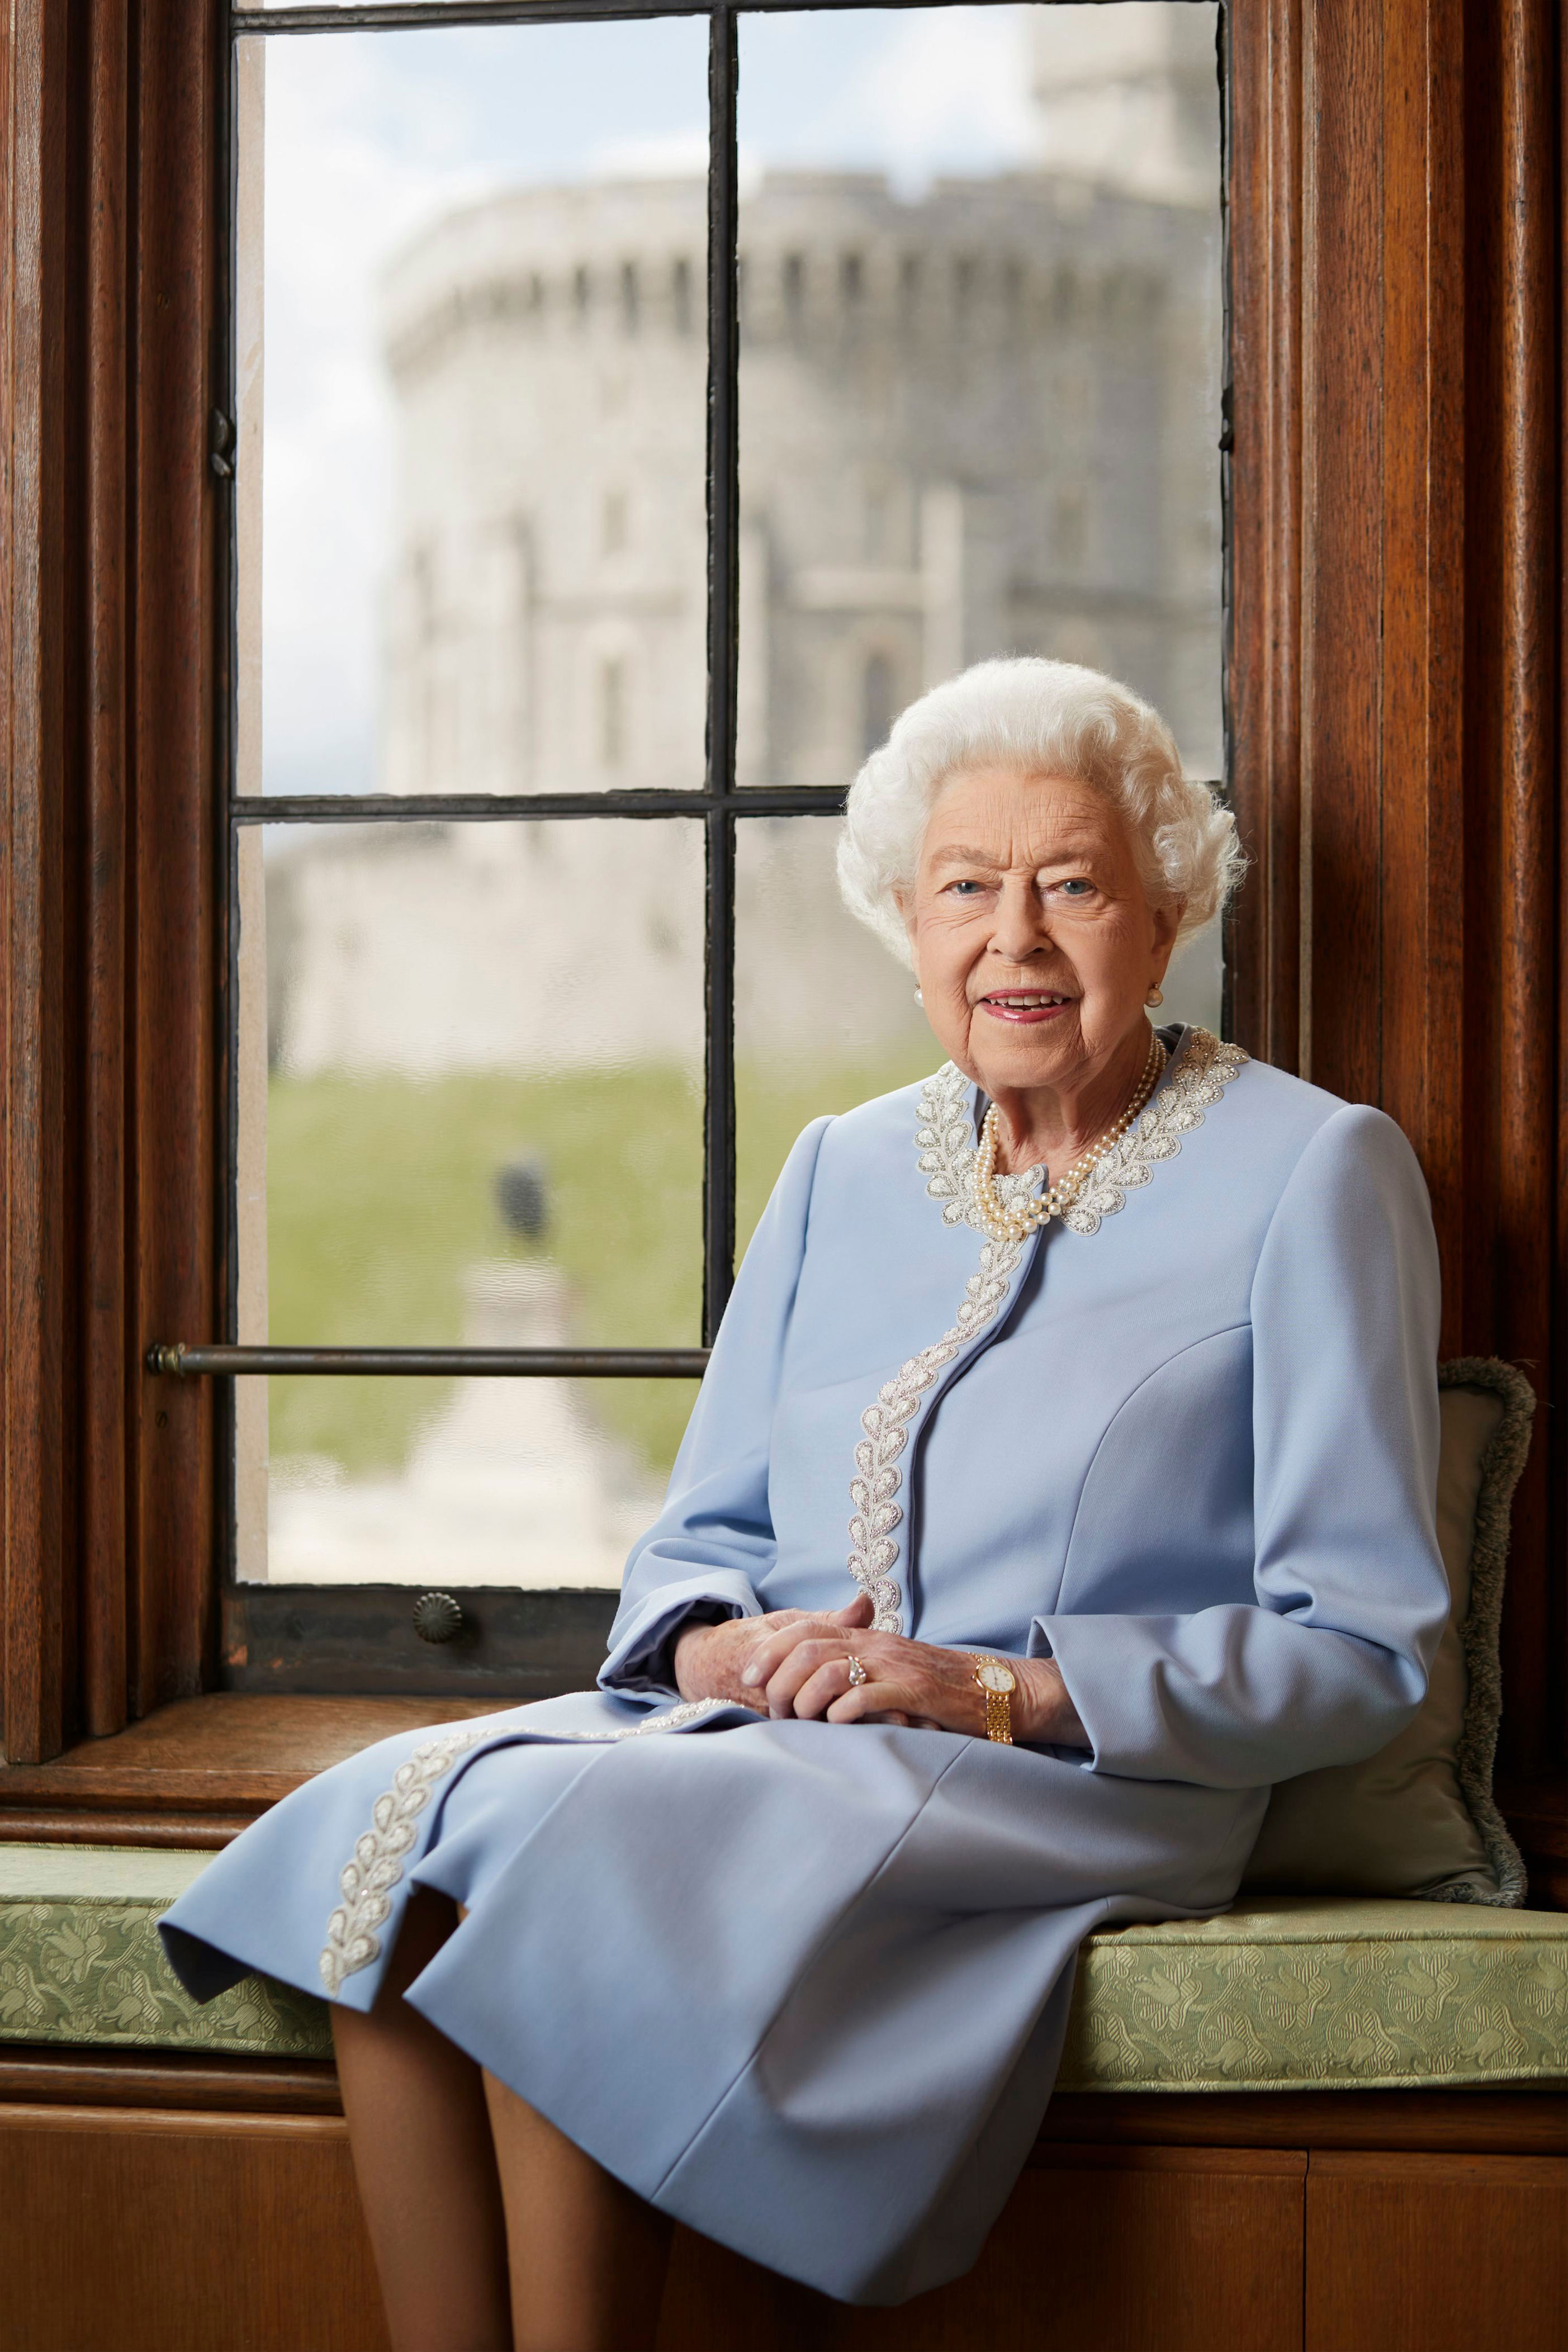 <p>Queen Elizabeth II sat for an official Platinum Jubilee portrait at her Windsor Castle home in Windsor, England, on June 1, 2022, marking 70 years on the throne. The next day, the U.K. kicked off four days of Platinum Jubilee celebrations.</p>